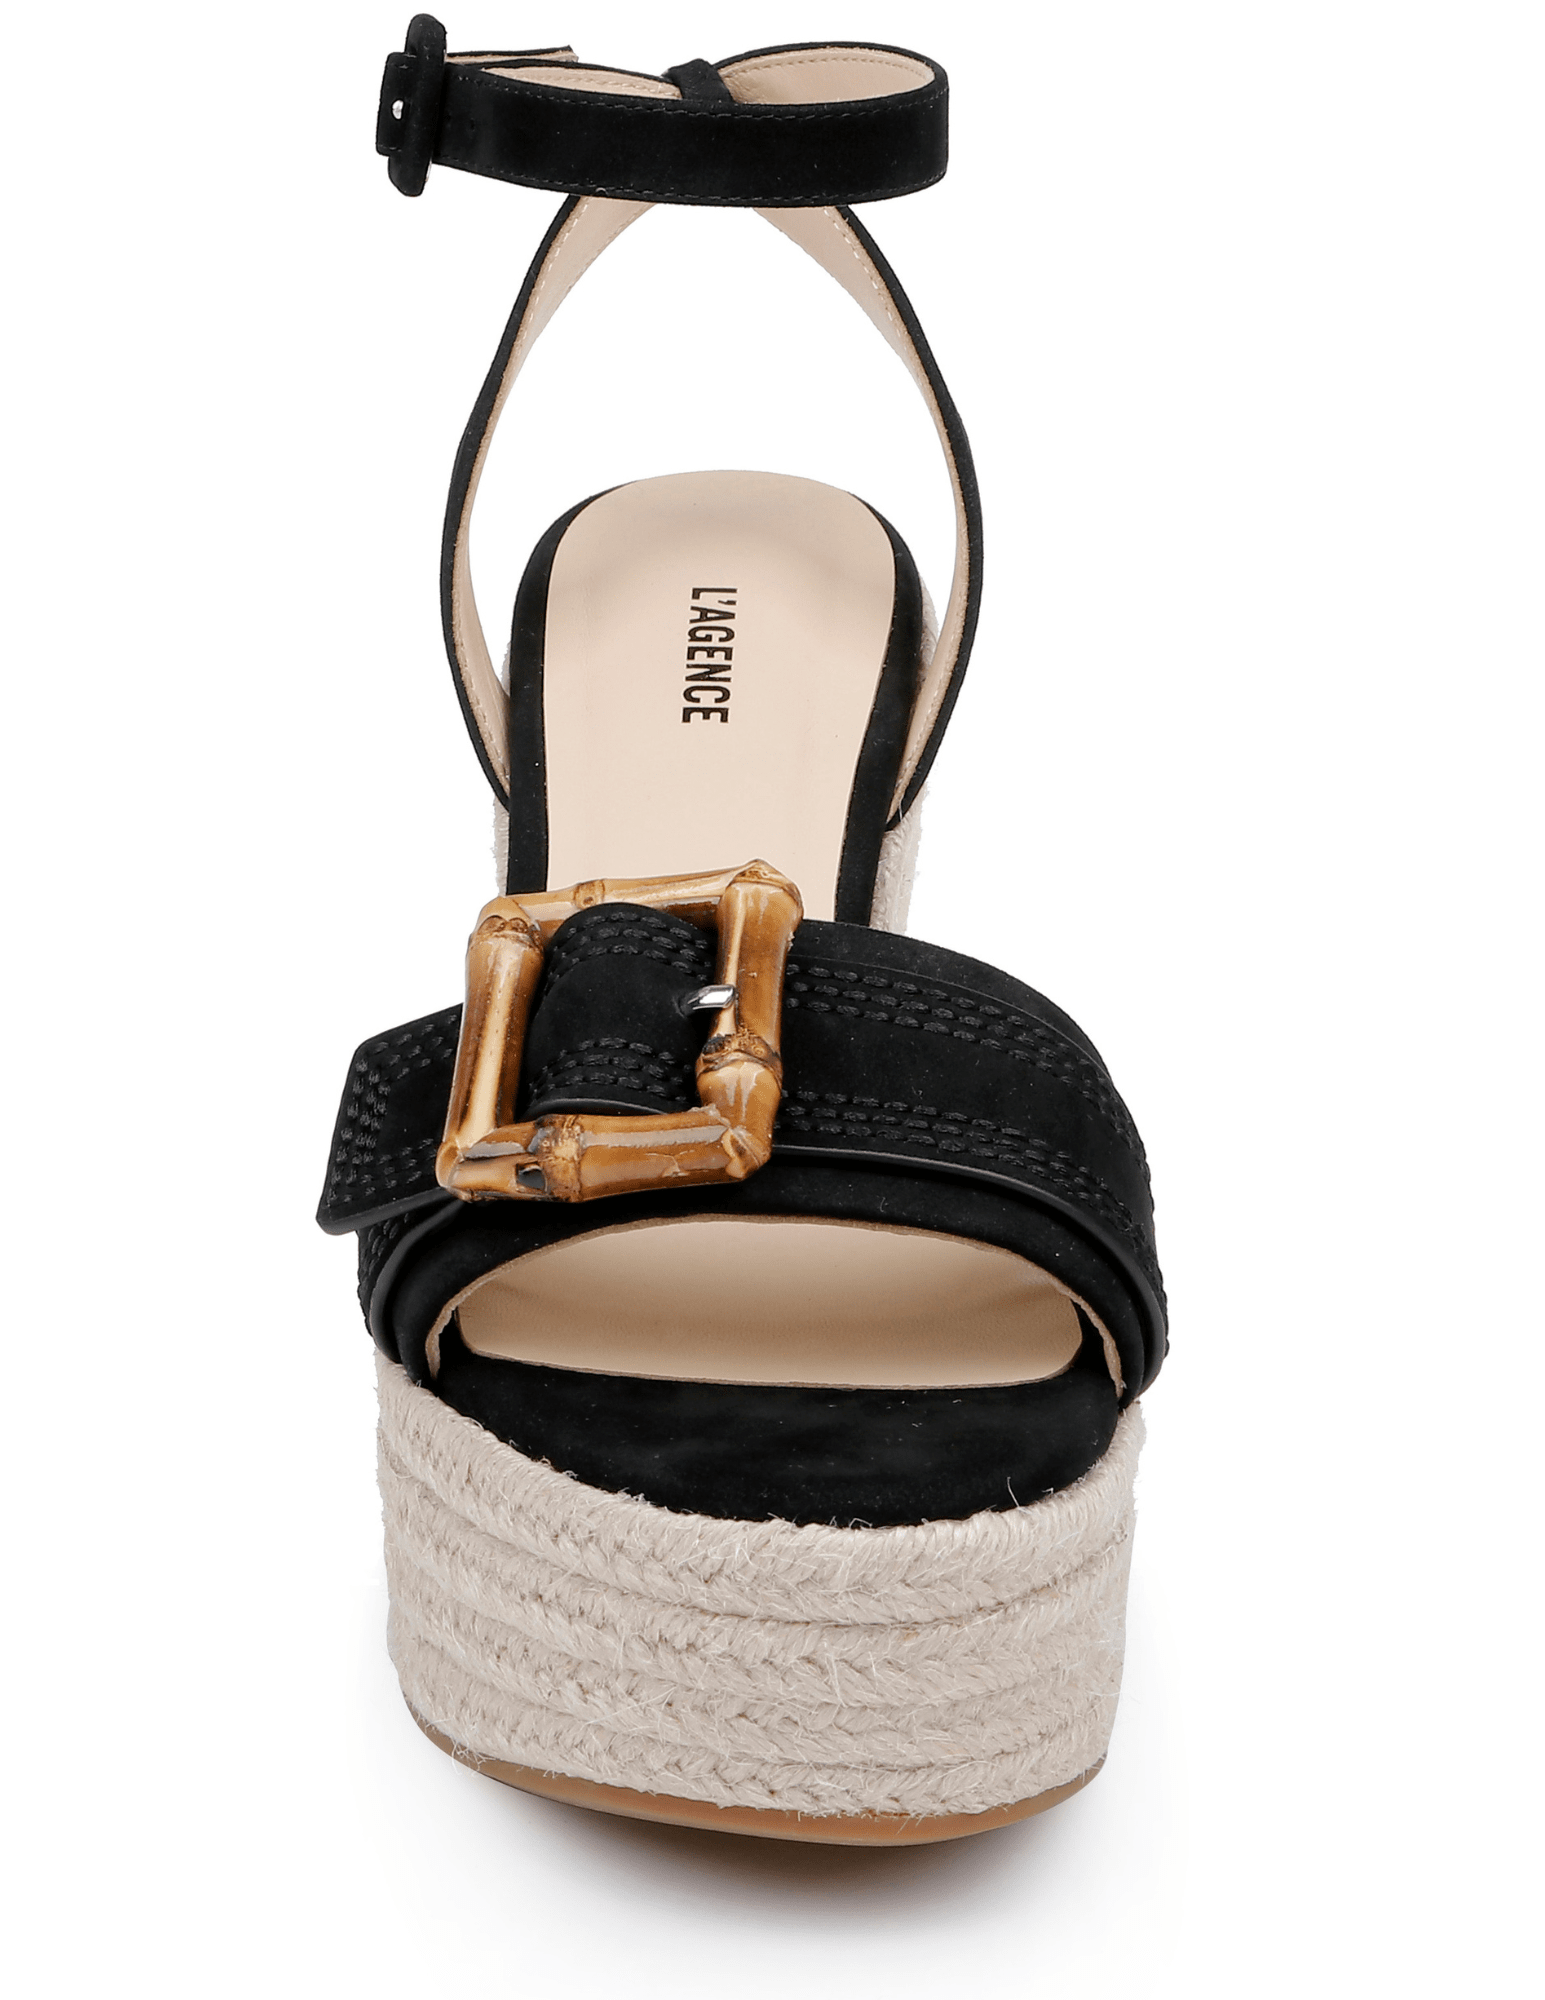 L'Agence Aurore Bamboo Buckle Espadrille Wedge Sandal